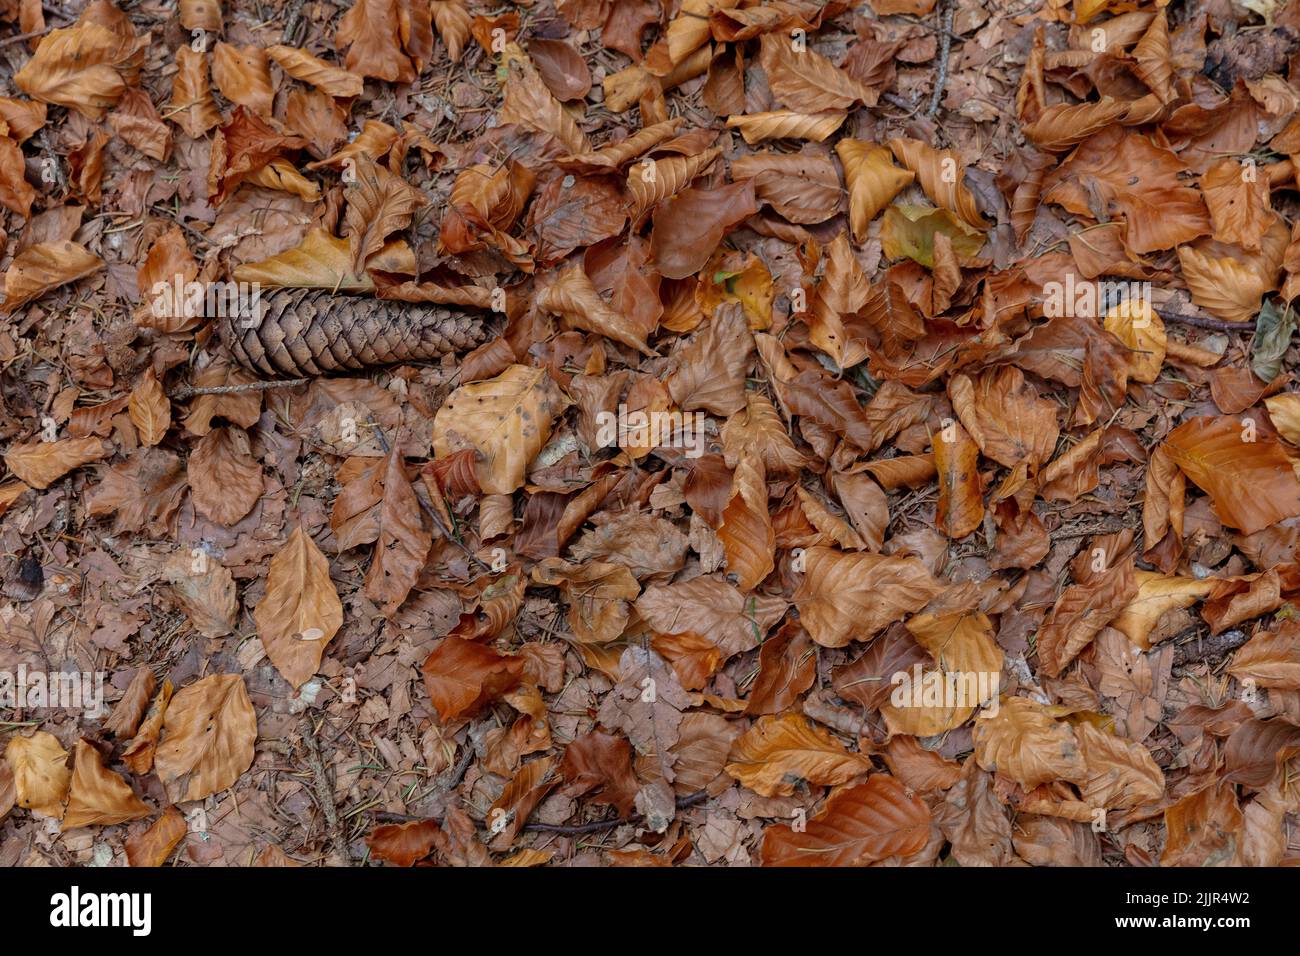 Close up view on the Bavarian Forrest ground covered with fallen golden oak leaves, pine seeds, pine needles Stock Photo